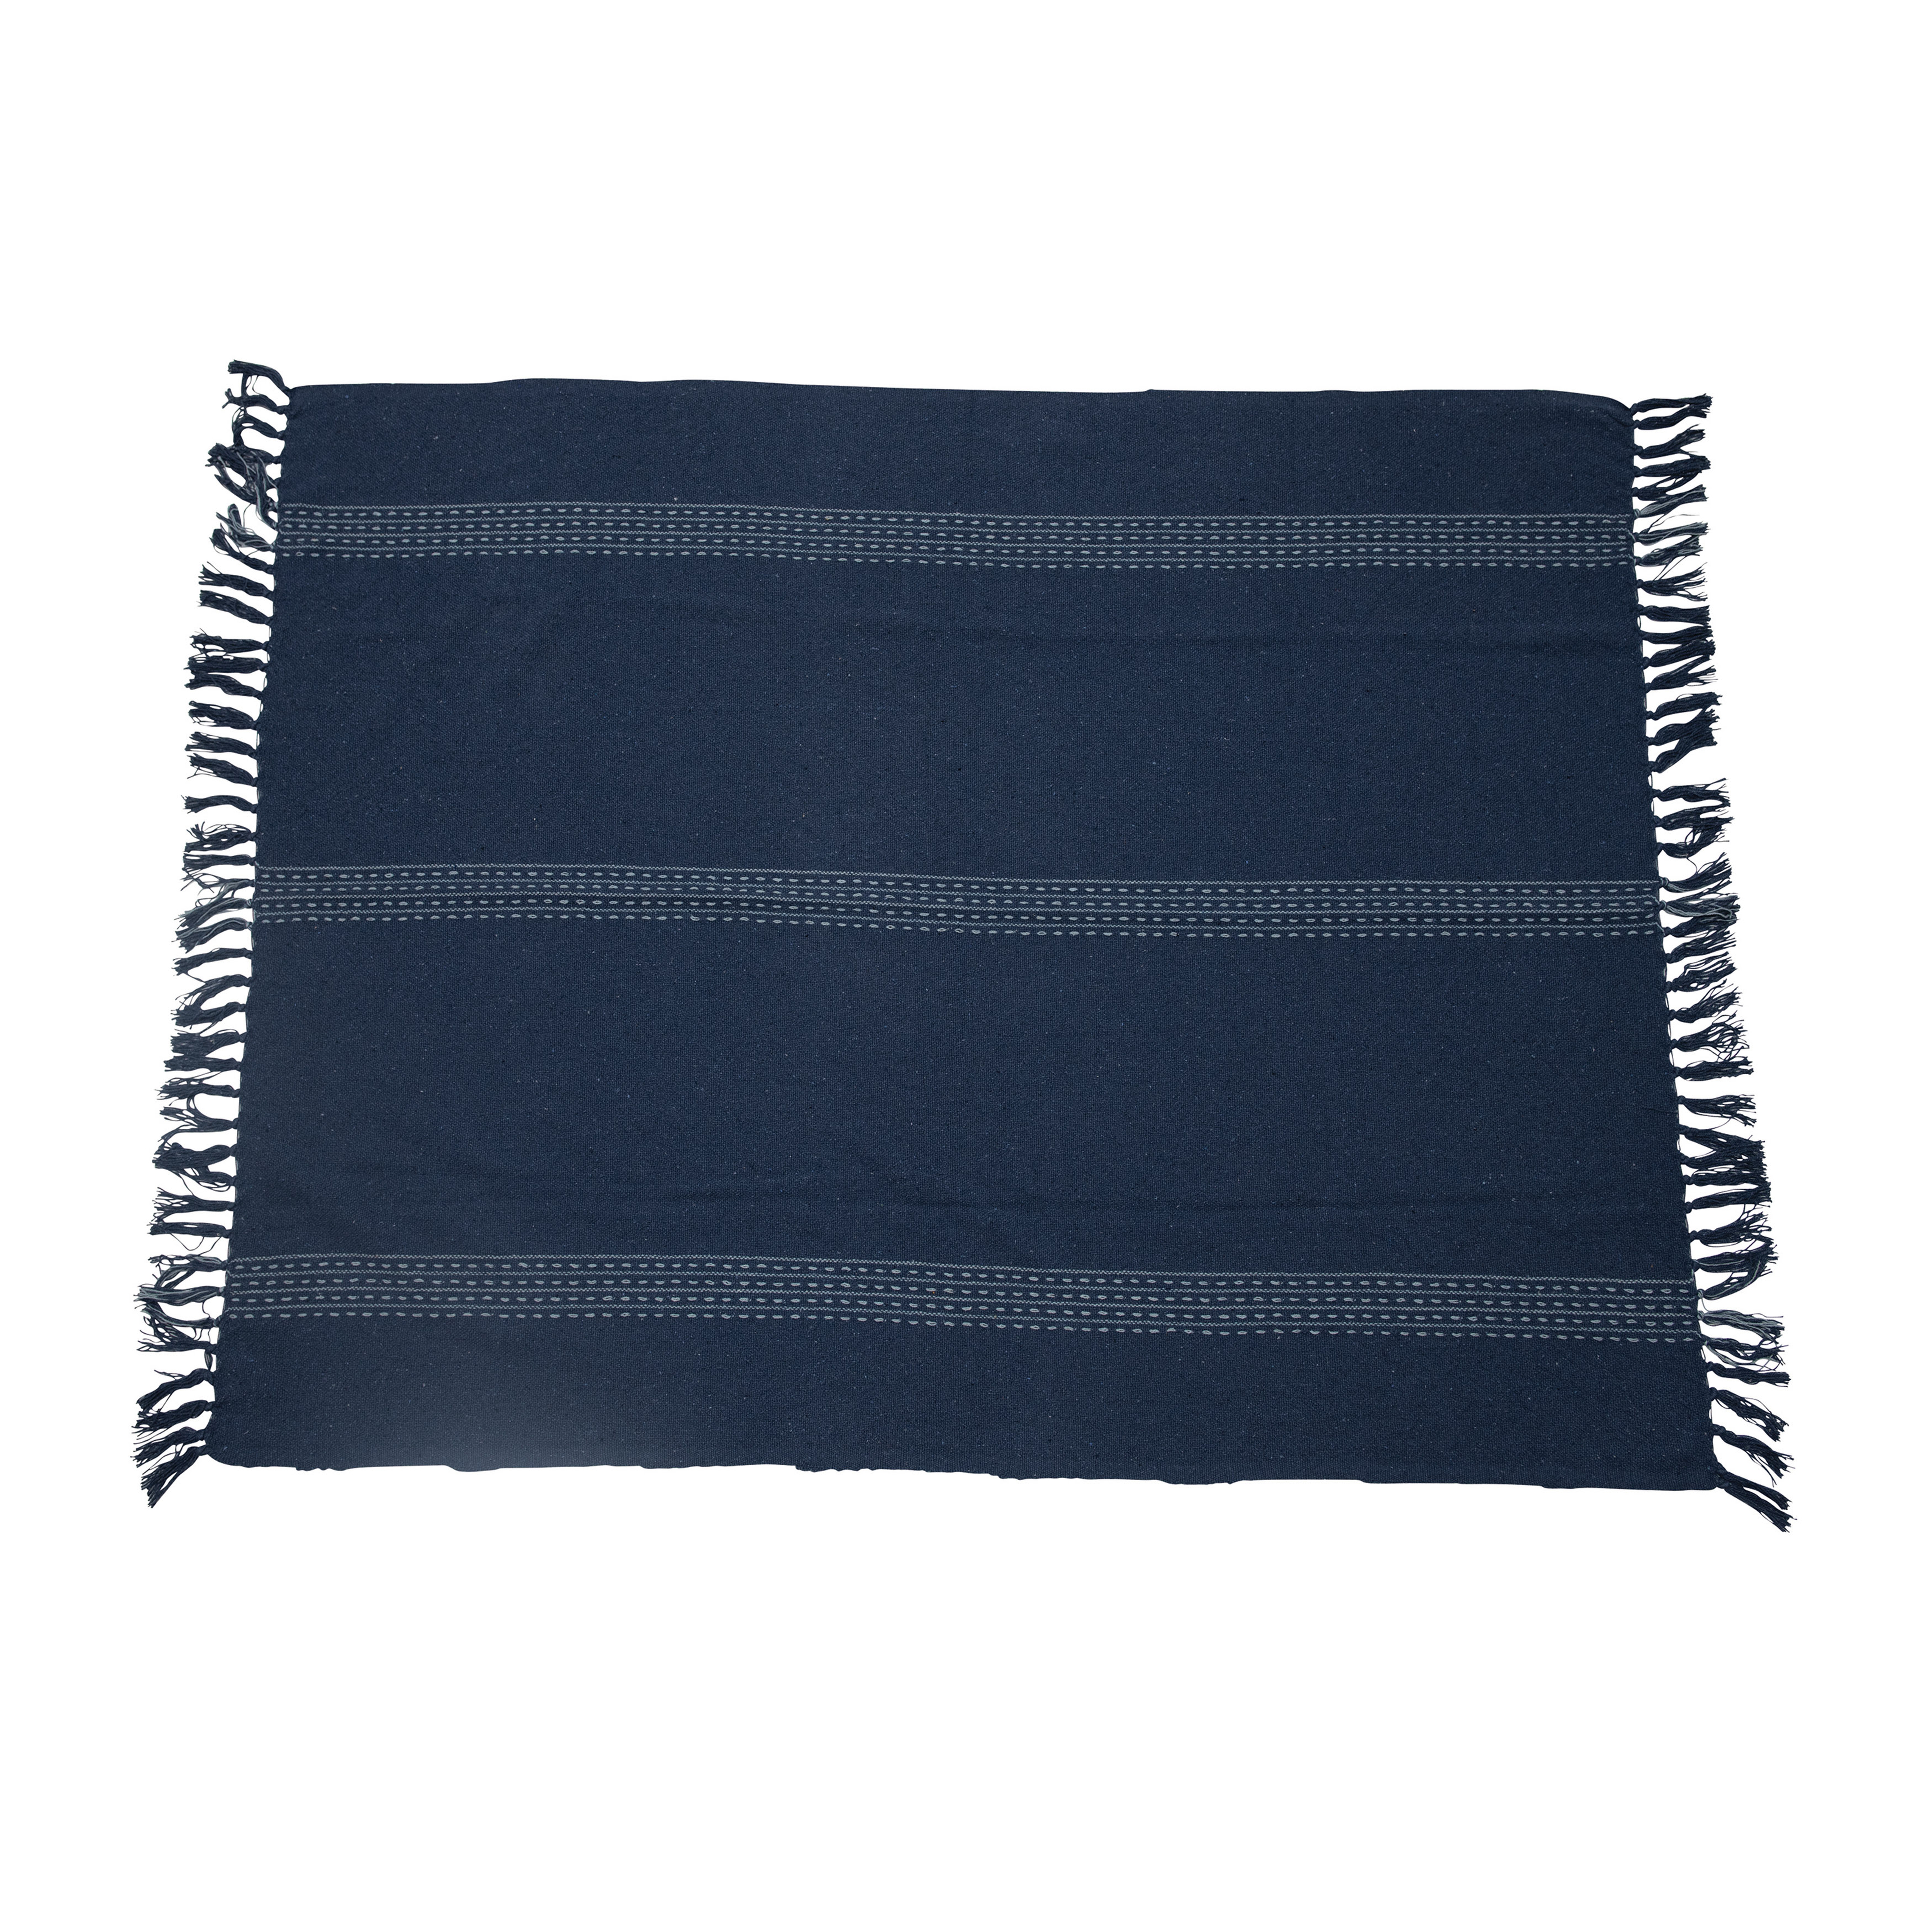 Soft and Cozy Traditional Woven Recycled Cotton Blend Throw Blanket with Stripe Design - Nomad Home